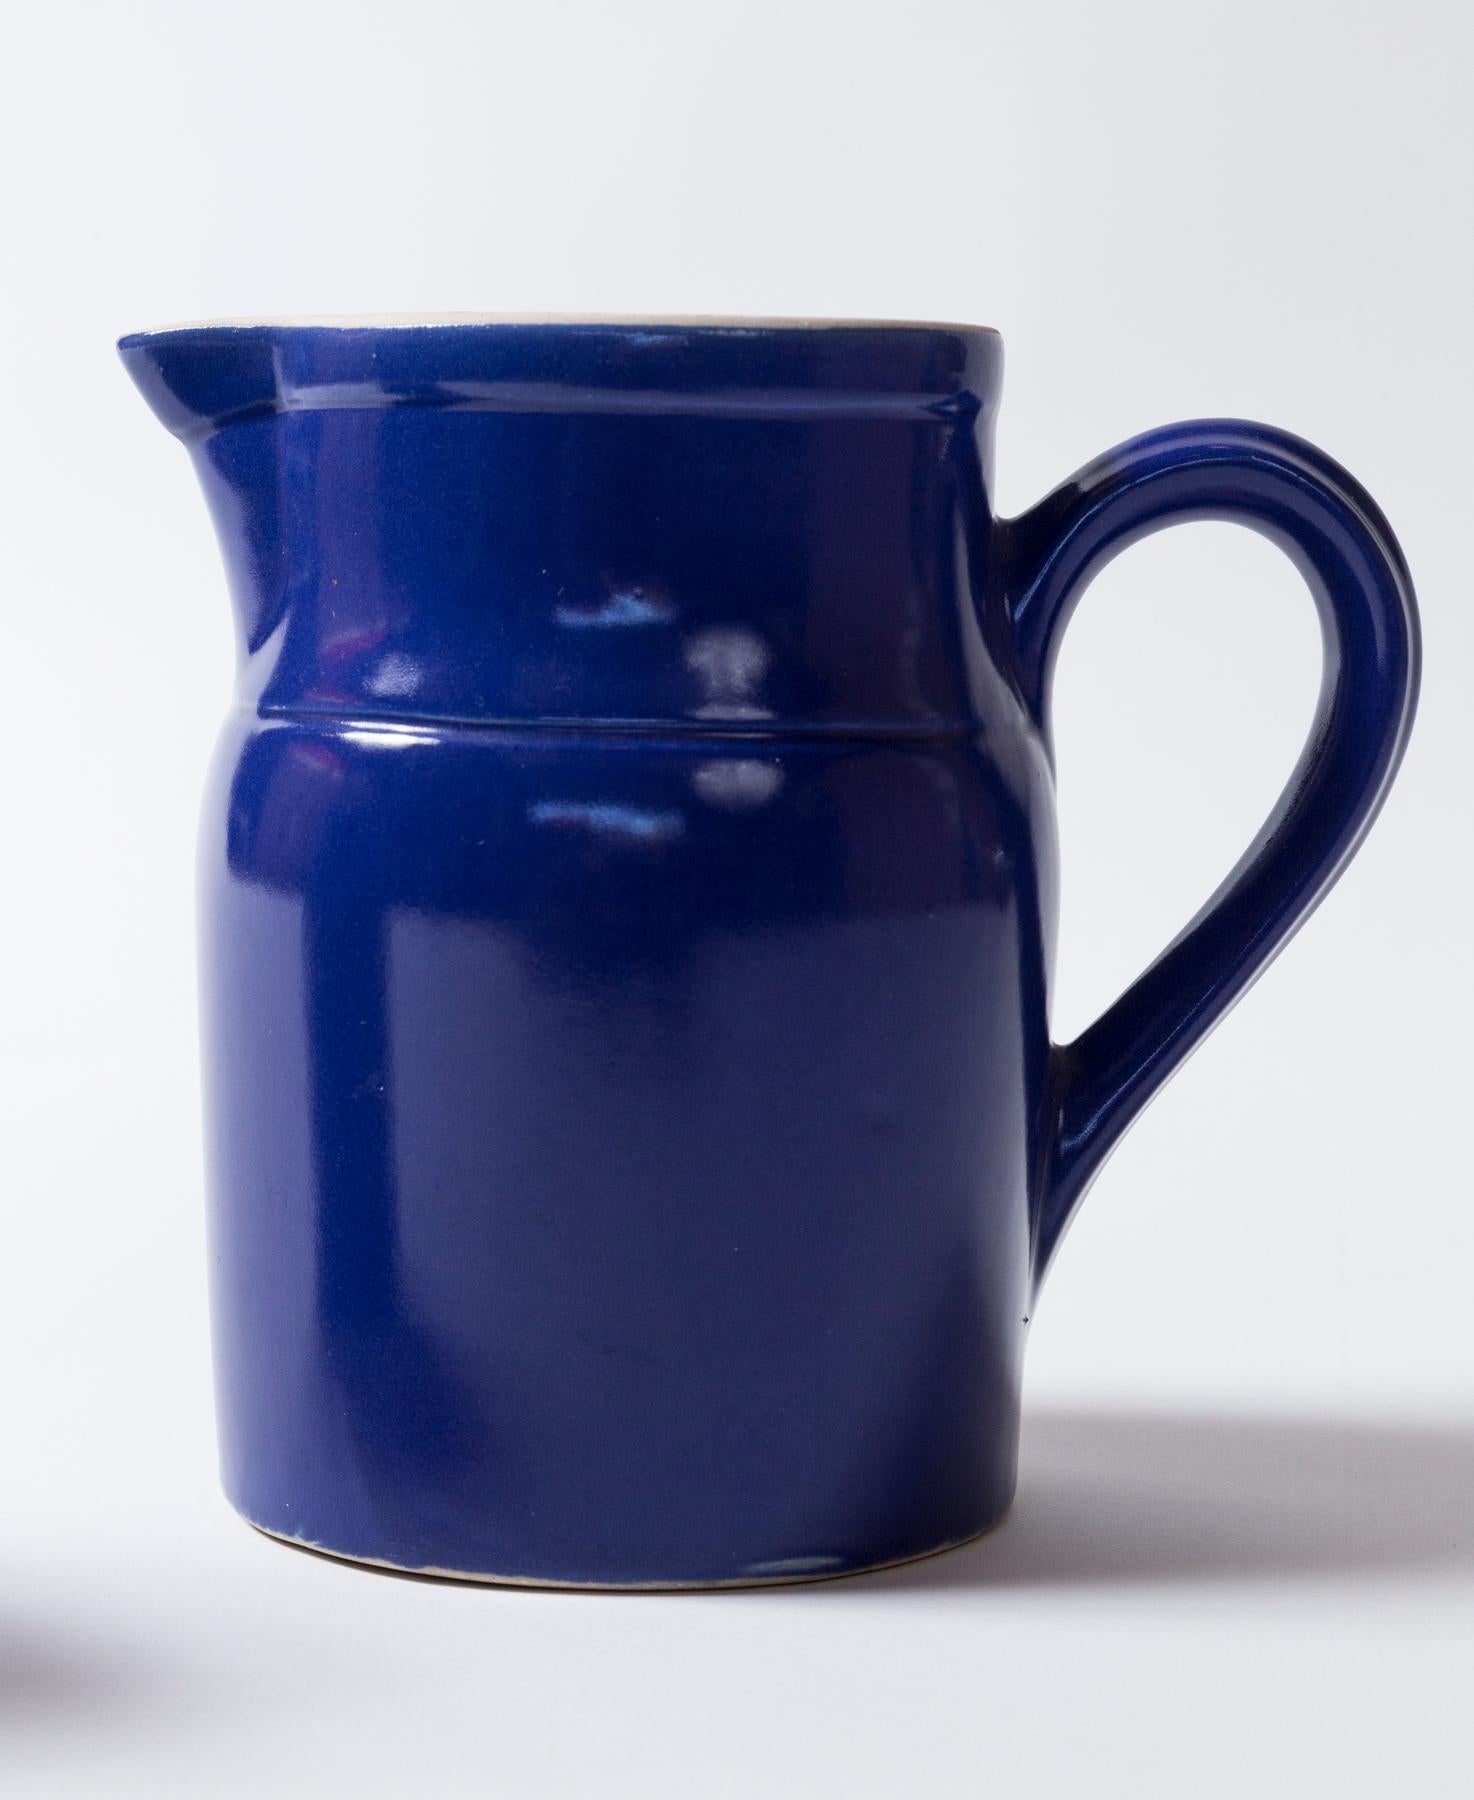 Two Vintage Ceramic Dairy Pitchers, Digoin, France, 1960's. Striking cobalt blue glaze with white glazed interior. Large: 7 inches high x 4-5/8 inches wide, 7-3/4 inches spout to handle. Small: 5-5/8 inches high x 3-3/8 inches wide, 6-1/4 inches